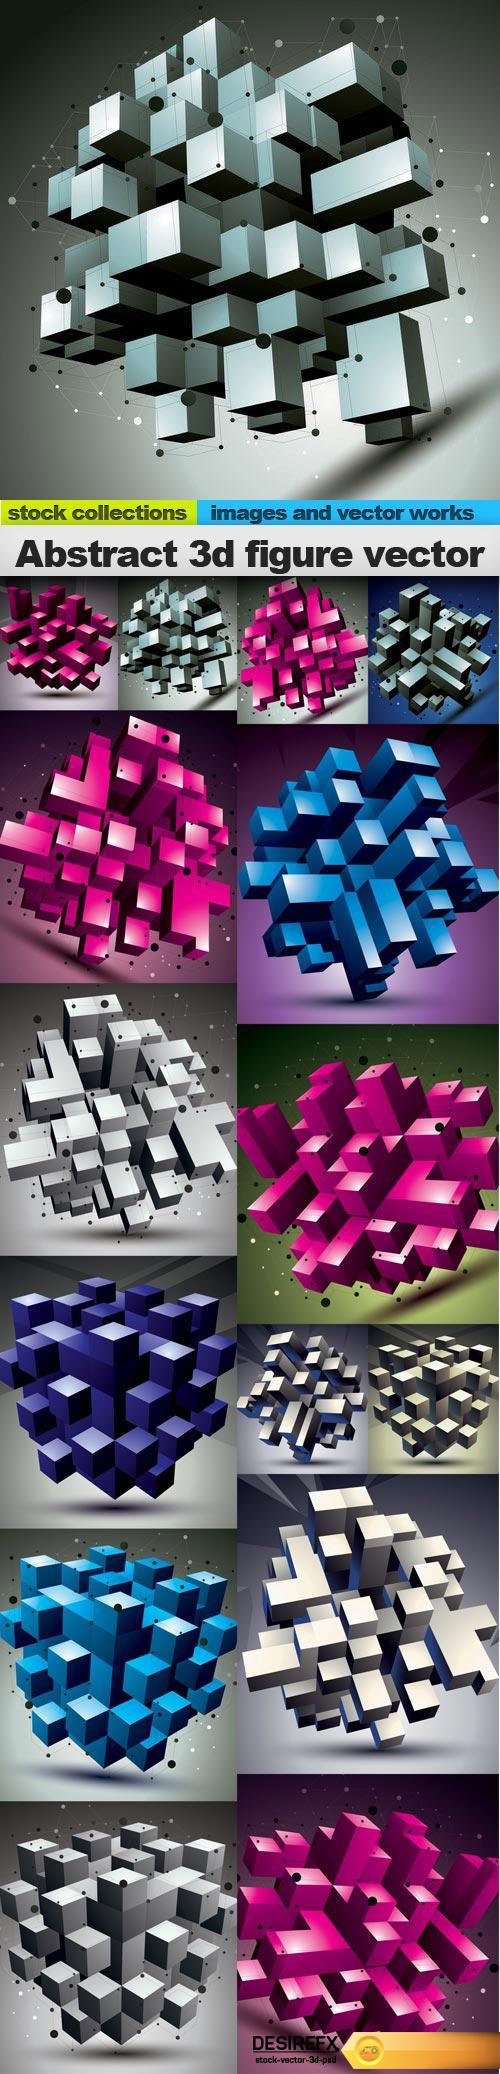 Abstract 3d figure vector, 15 x EPS